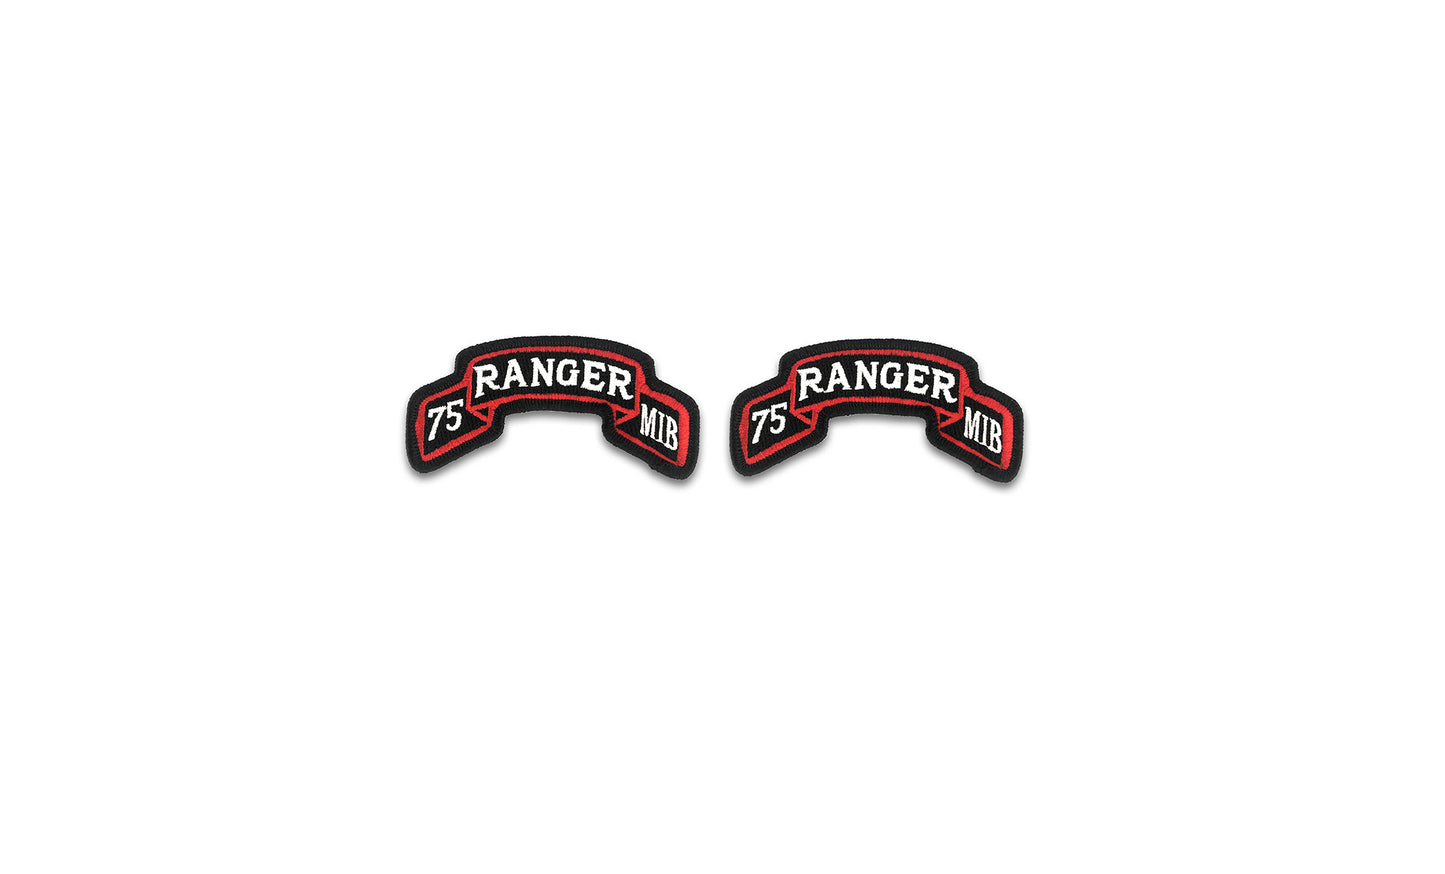 U.S. Army75th Ranger Military Intelligence Battalion Color Scroll W/ Hook Fastener (pair)